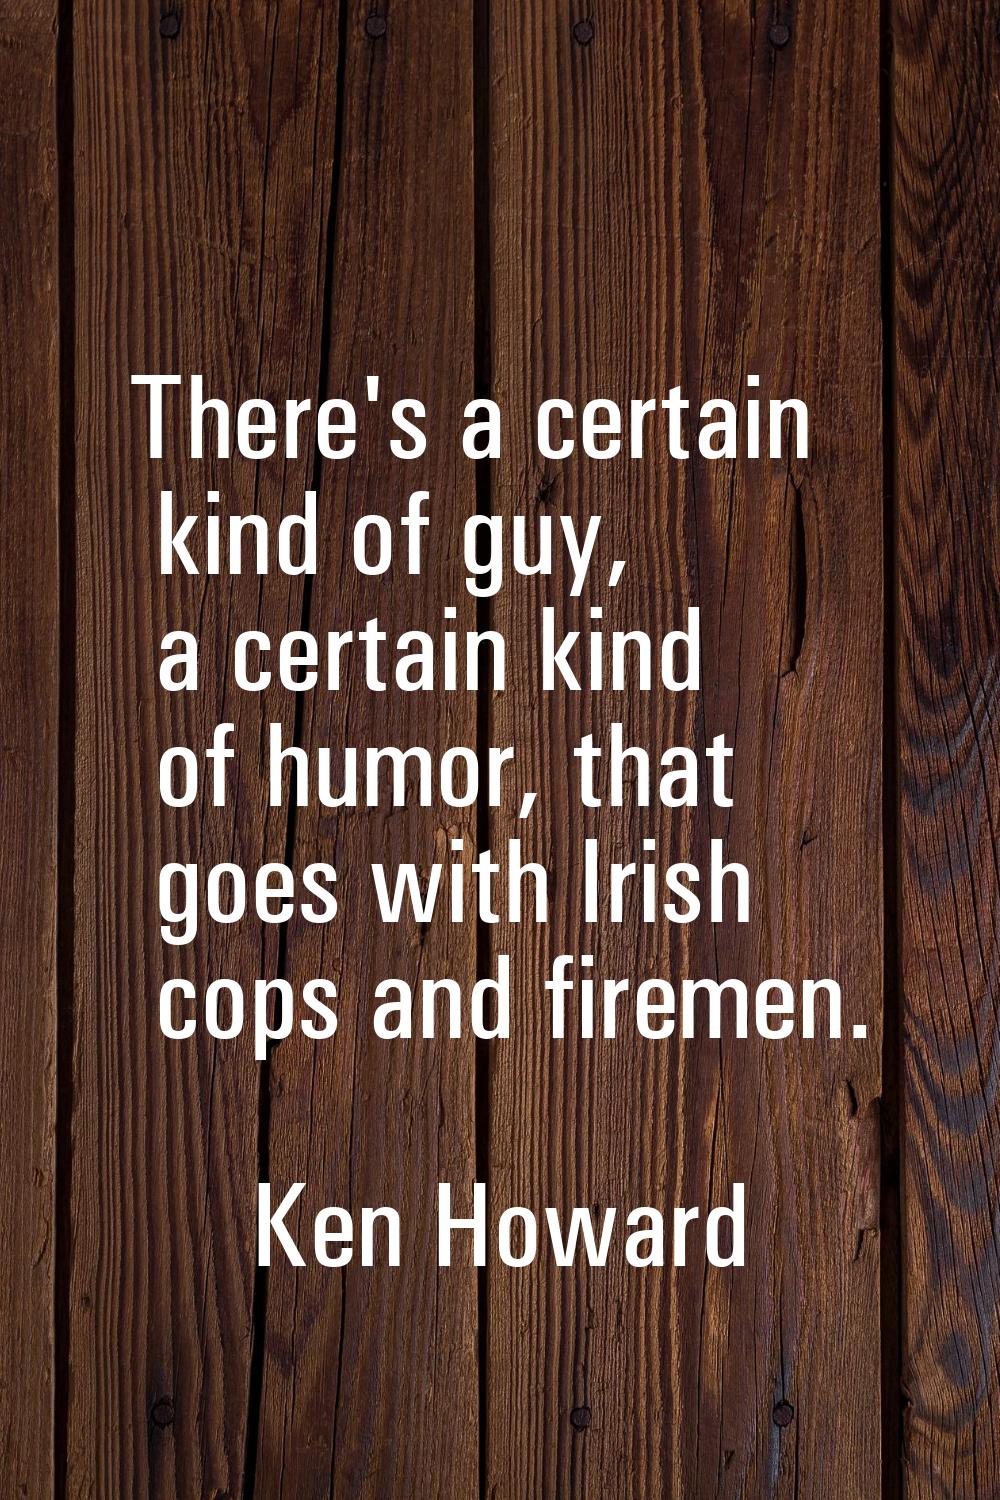 There's a certain kind of guy, a certain kind of humor, that goes with Irish cops and firemen.